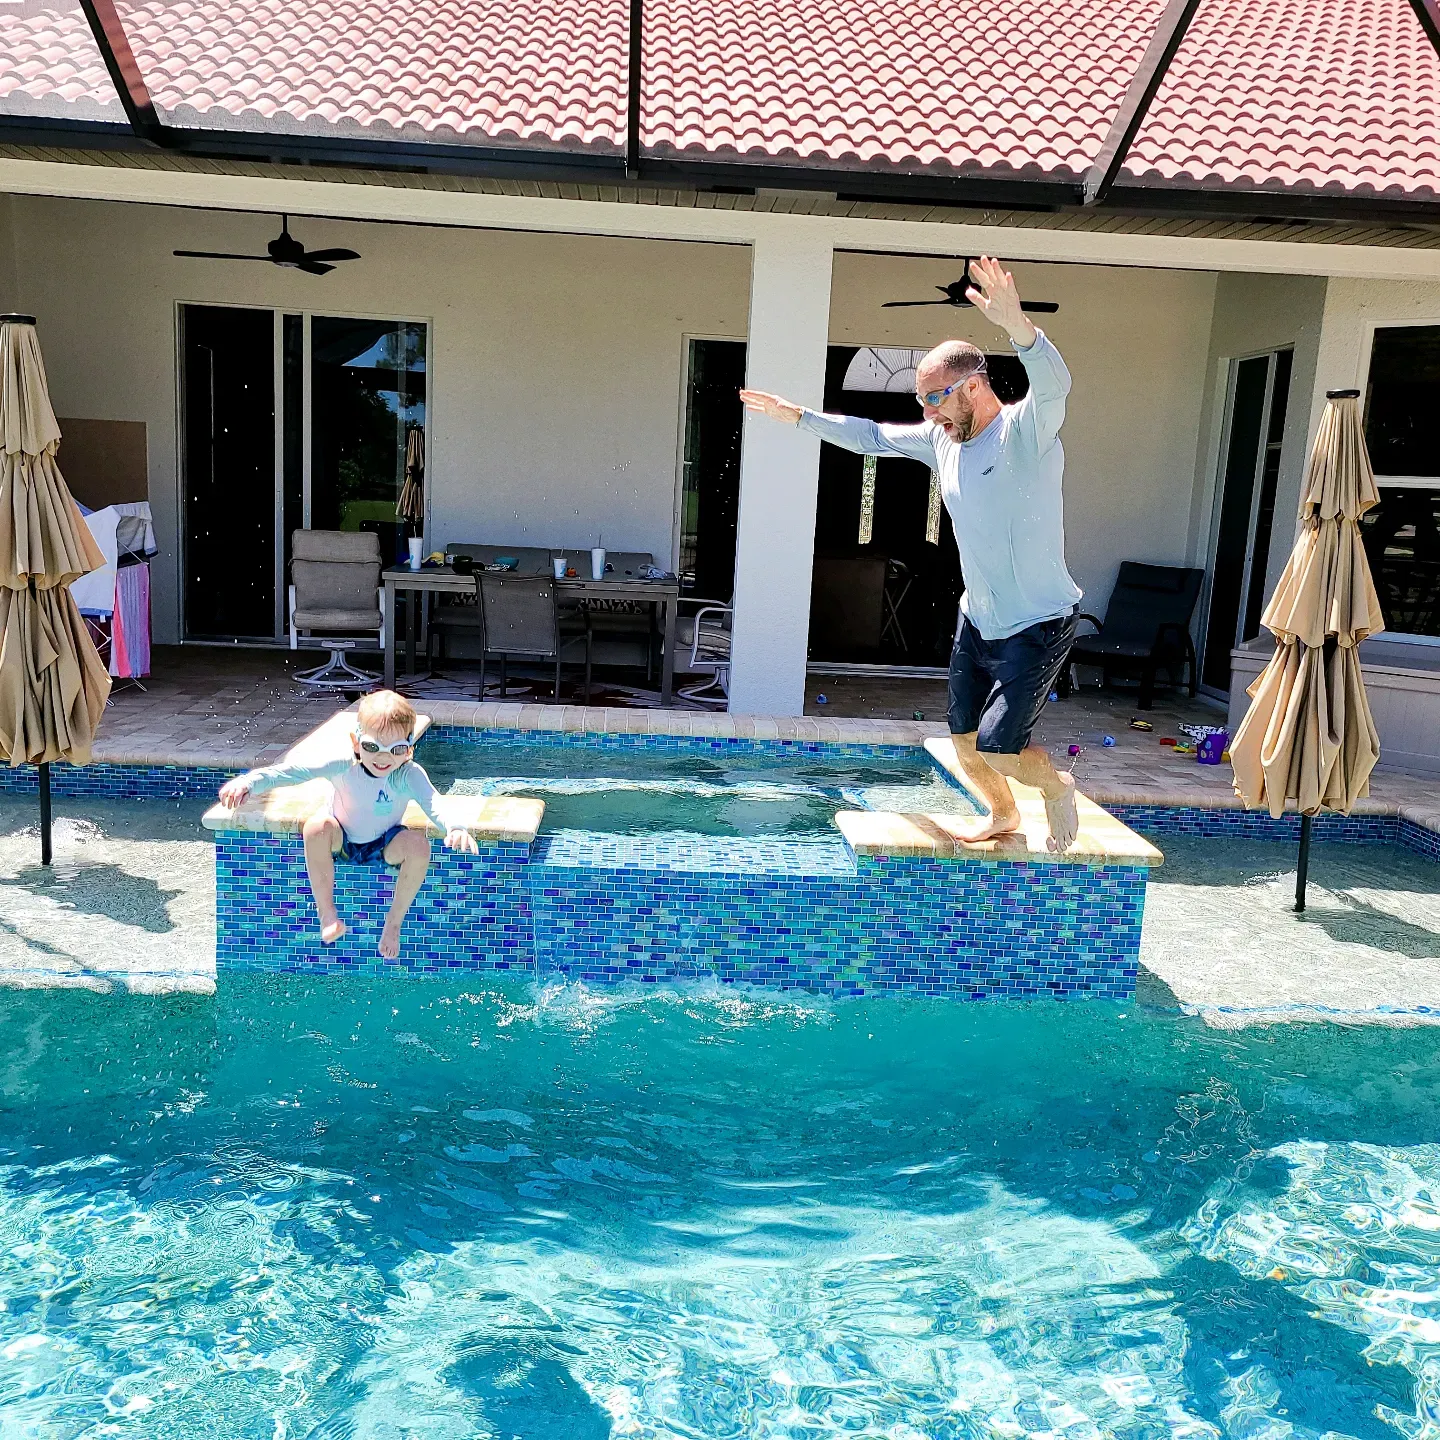 Lucas and Daddy loved to practice their jumps in the pool when we lived in Florida 